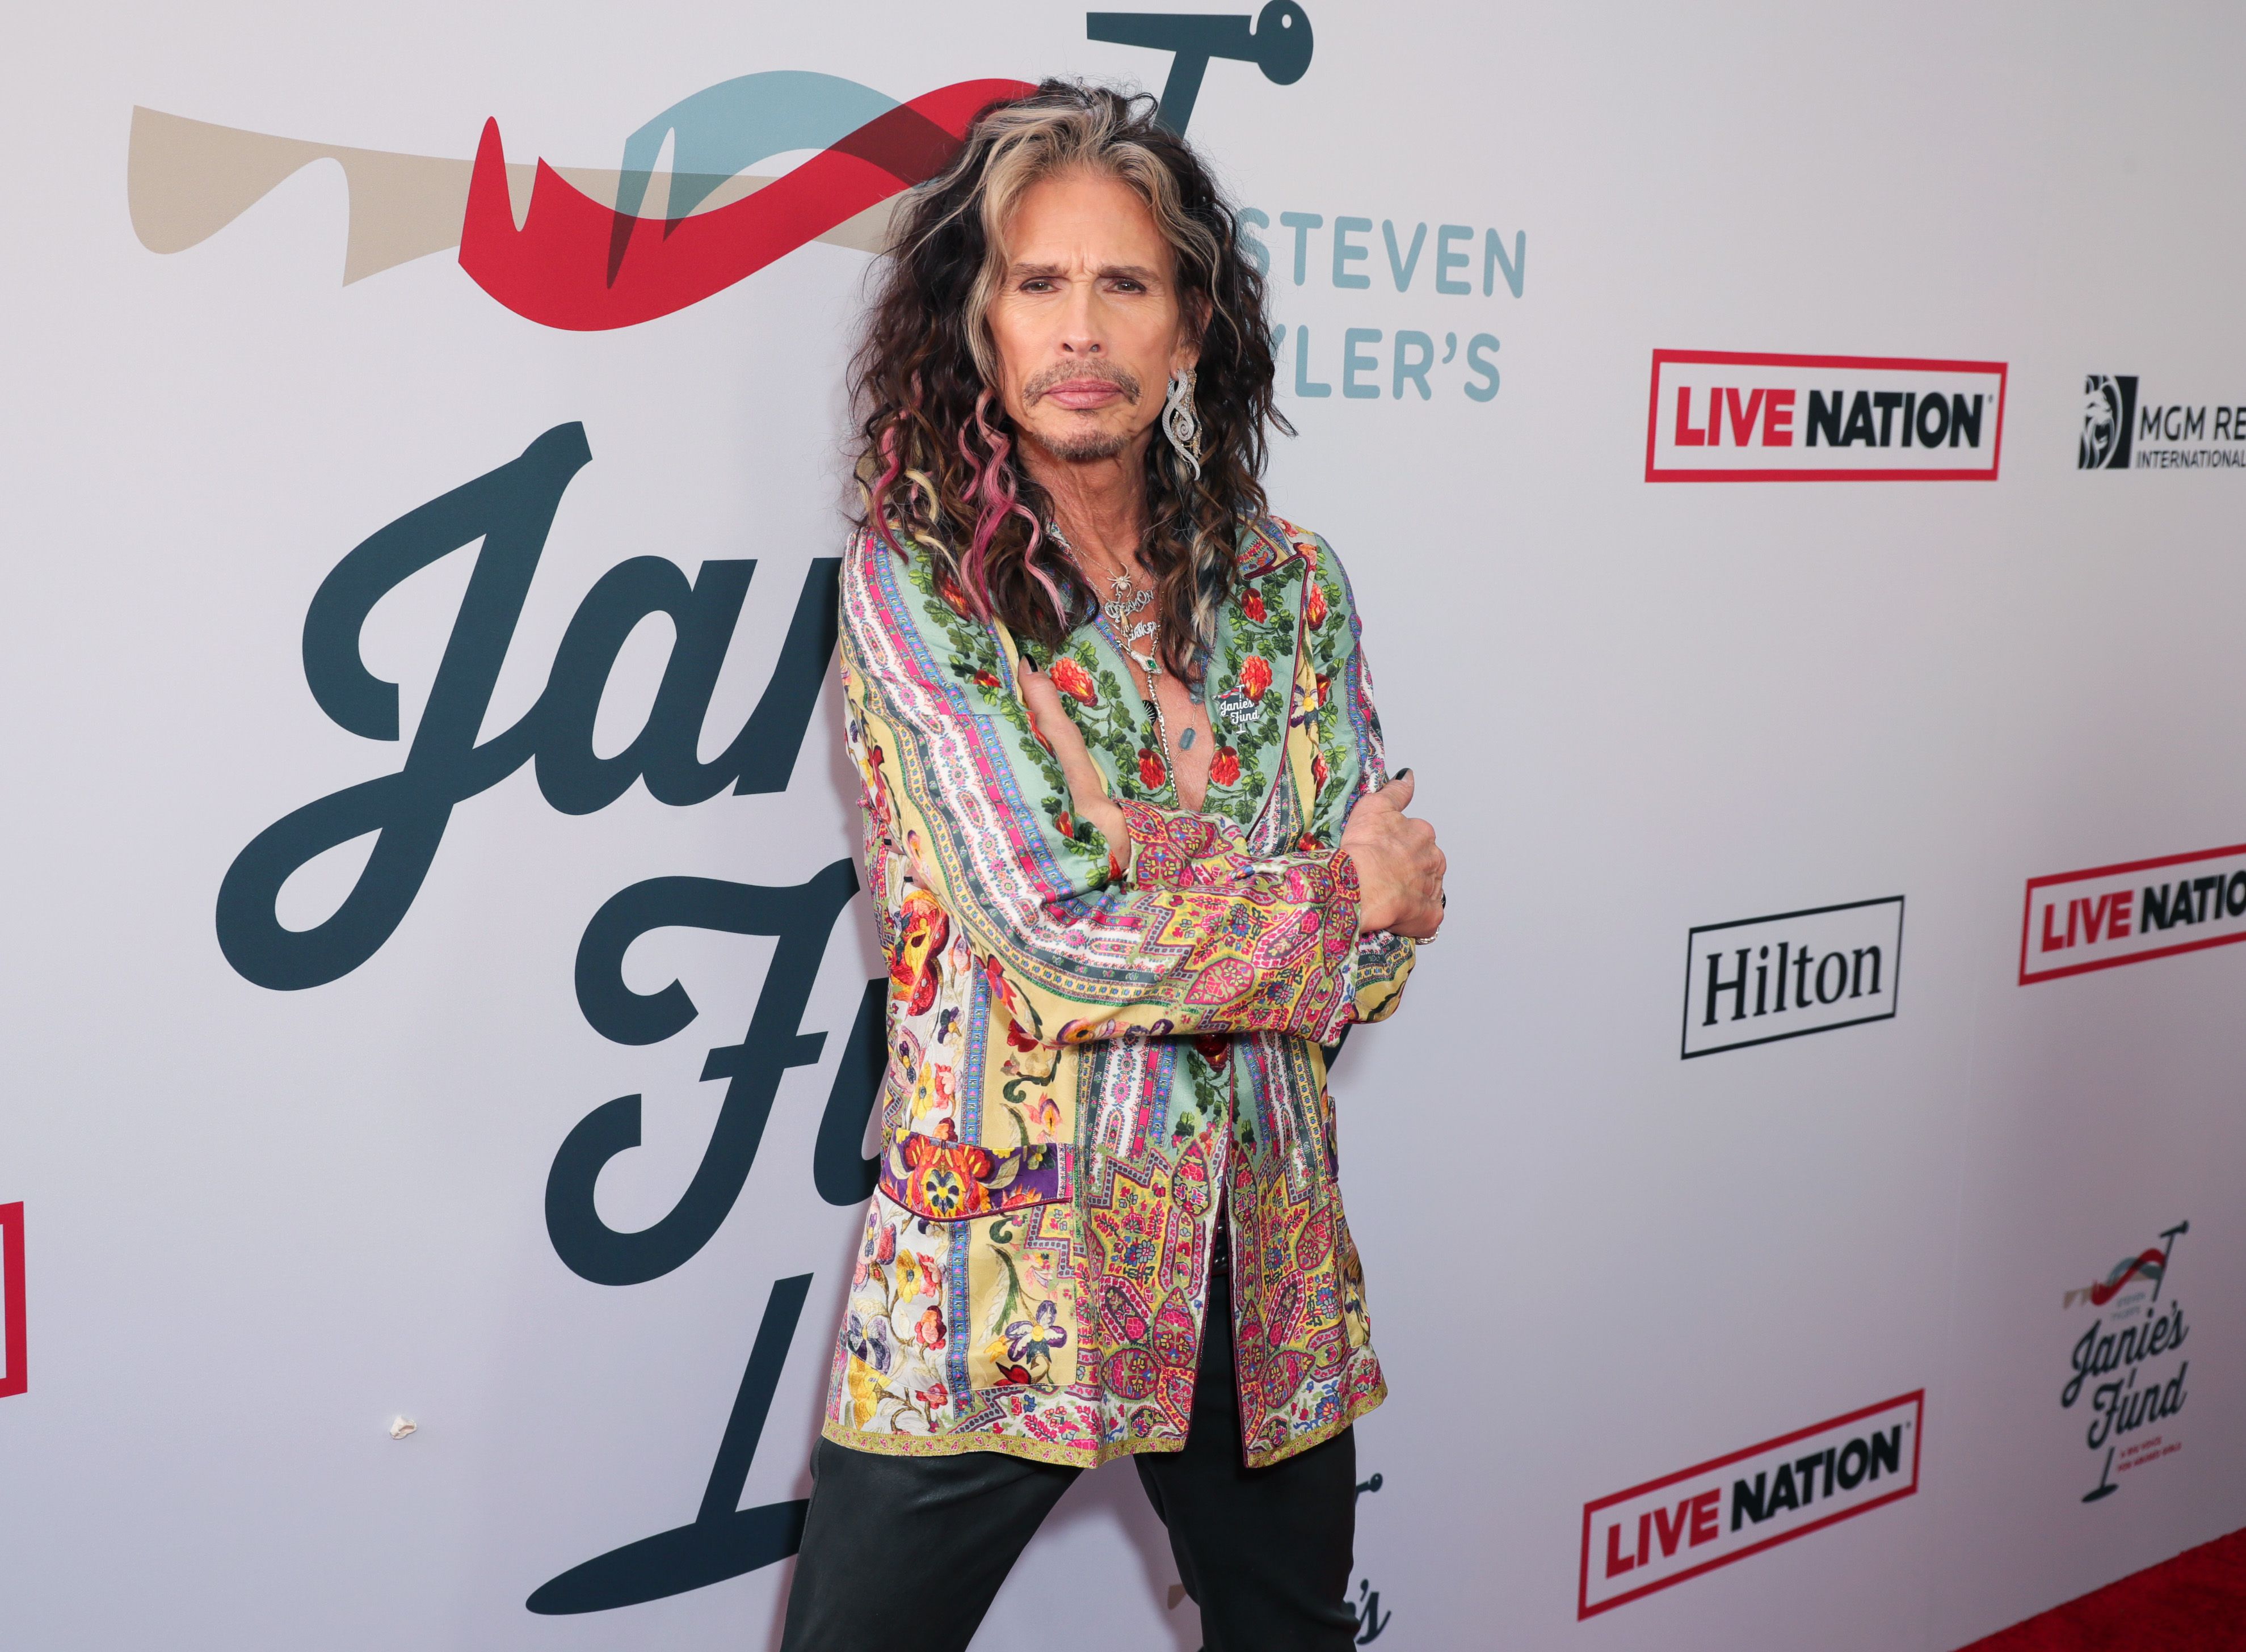 LOS ANGELES, CALIFORNIA - JANUARY 26: (L-R) Steven Tyler arrives at Steven Tyler's Third Annual Grammy Awards Viewing Party to benefit Janie’s Fund presented by Live Nation at Raleigh Studios on January 26, 2020 in Los Angeles, California. (Photo by Leon Bennett/Getty Images for Janie's Fund)